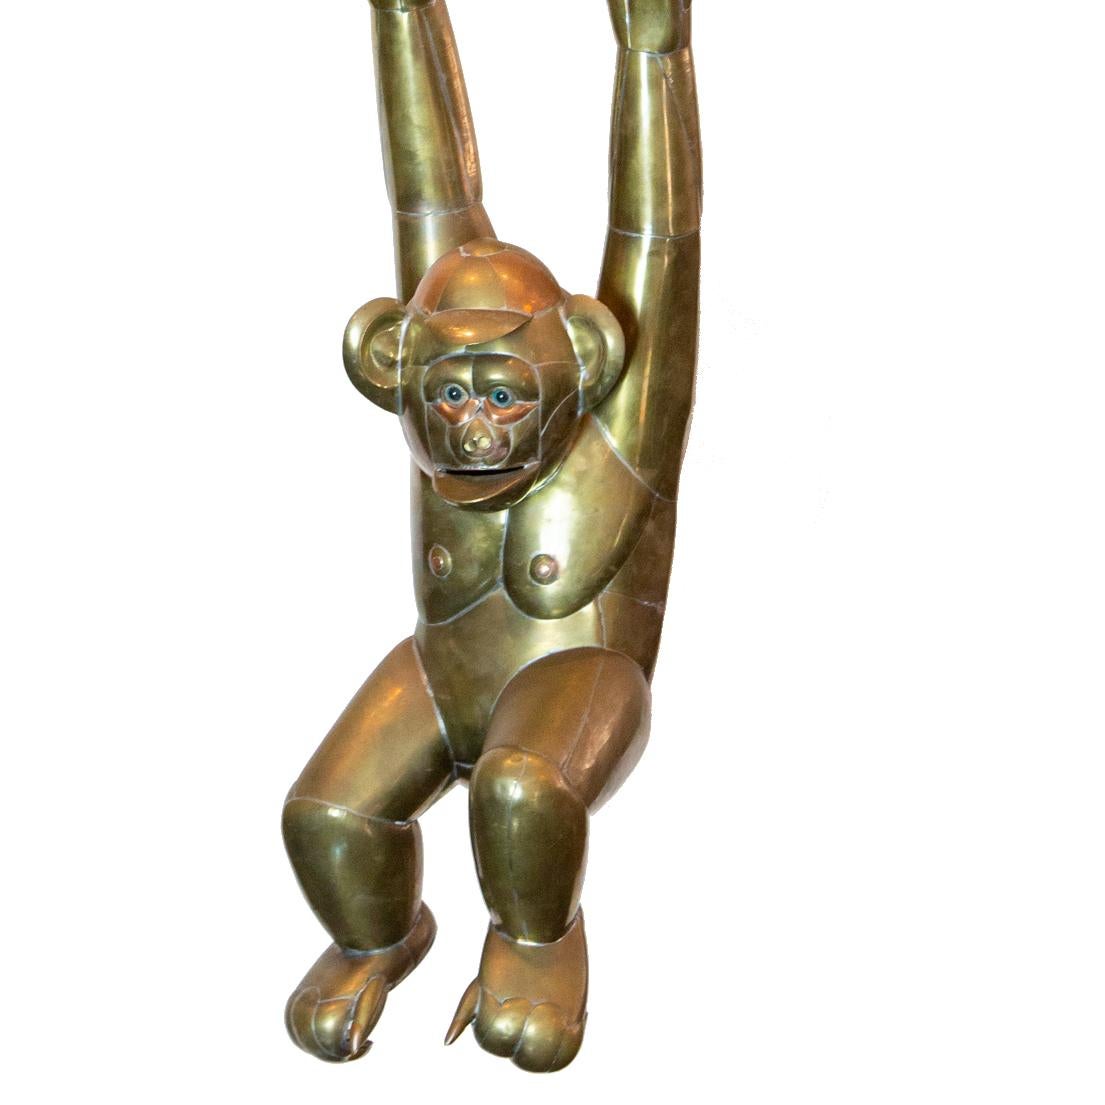 Bustamante hanging brass monkey with baseball cap. Large scale brass monkey by Sergio Bustamante, circa early 1970s. This whimsical yet detailed example hangs effortlessly from its brass branch with leaf details. Measures: 36